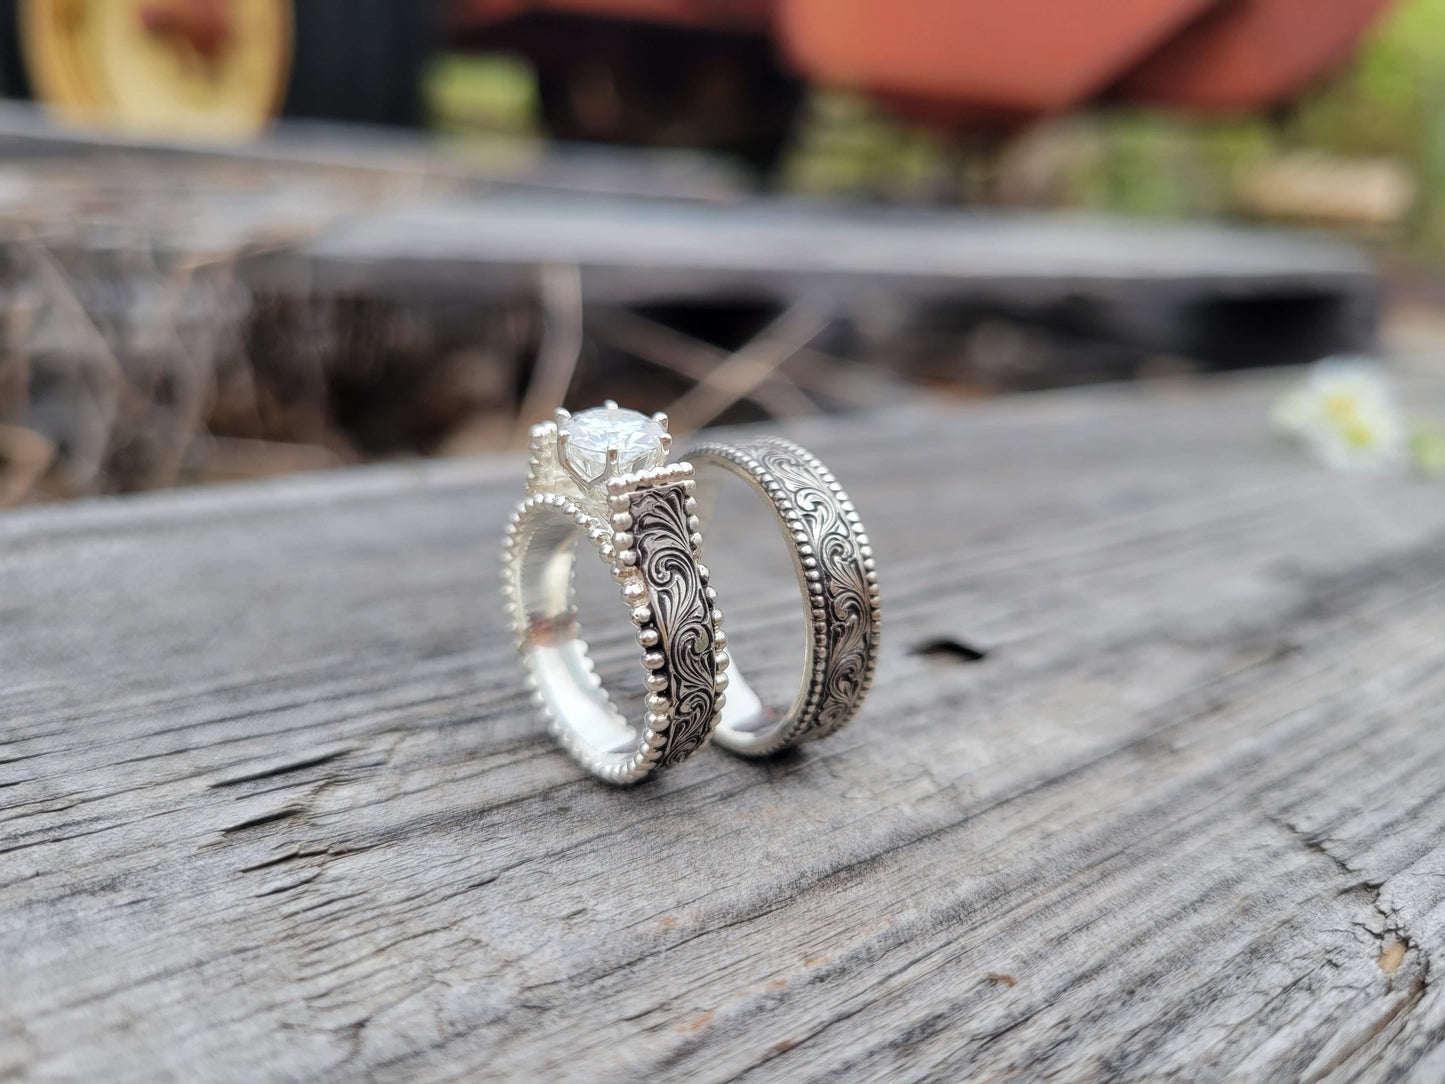 The Taylor Set: Western Wedding Band set, Western Engagement ring, Cowgirl wedding rings, sterling silver engagement ring